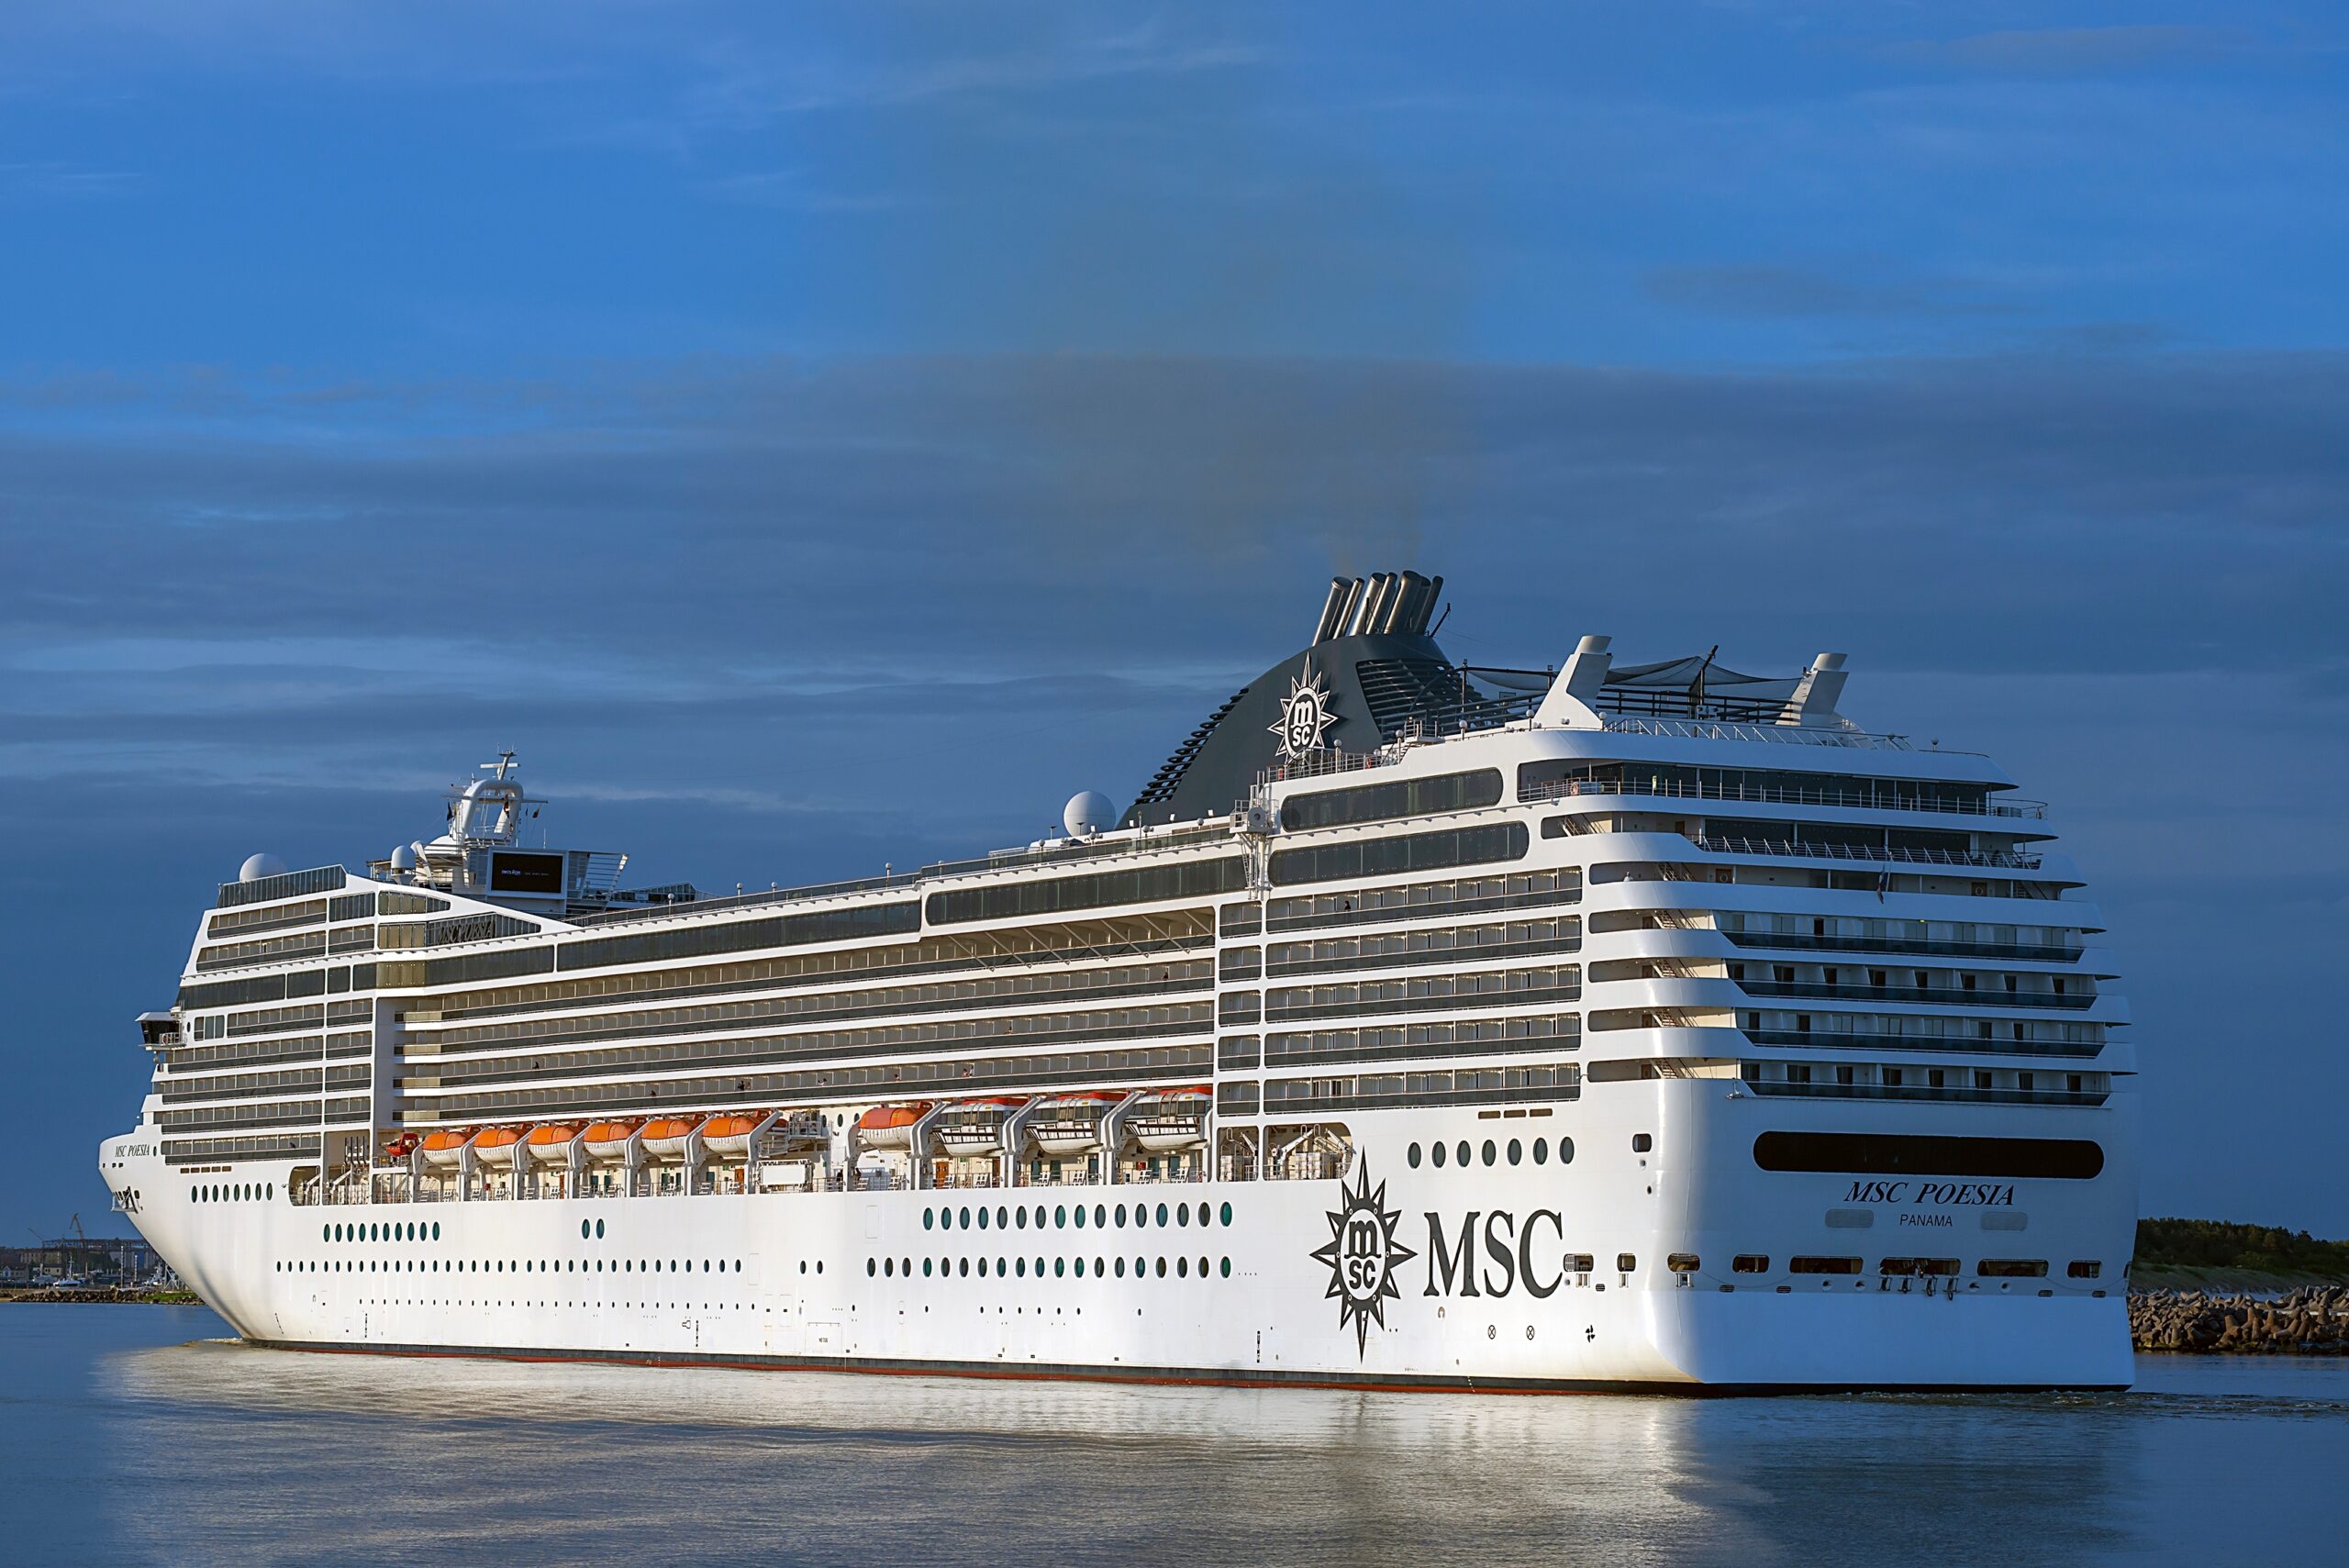 Cruise liner MSC Poesia in the Baltic Sea